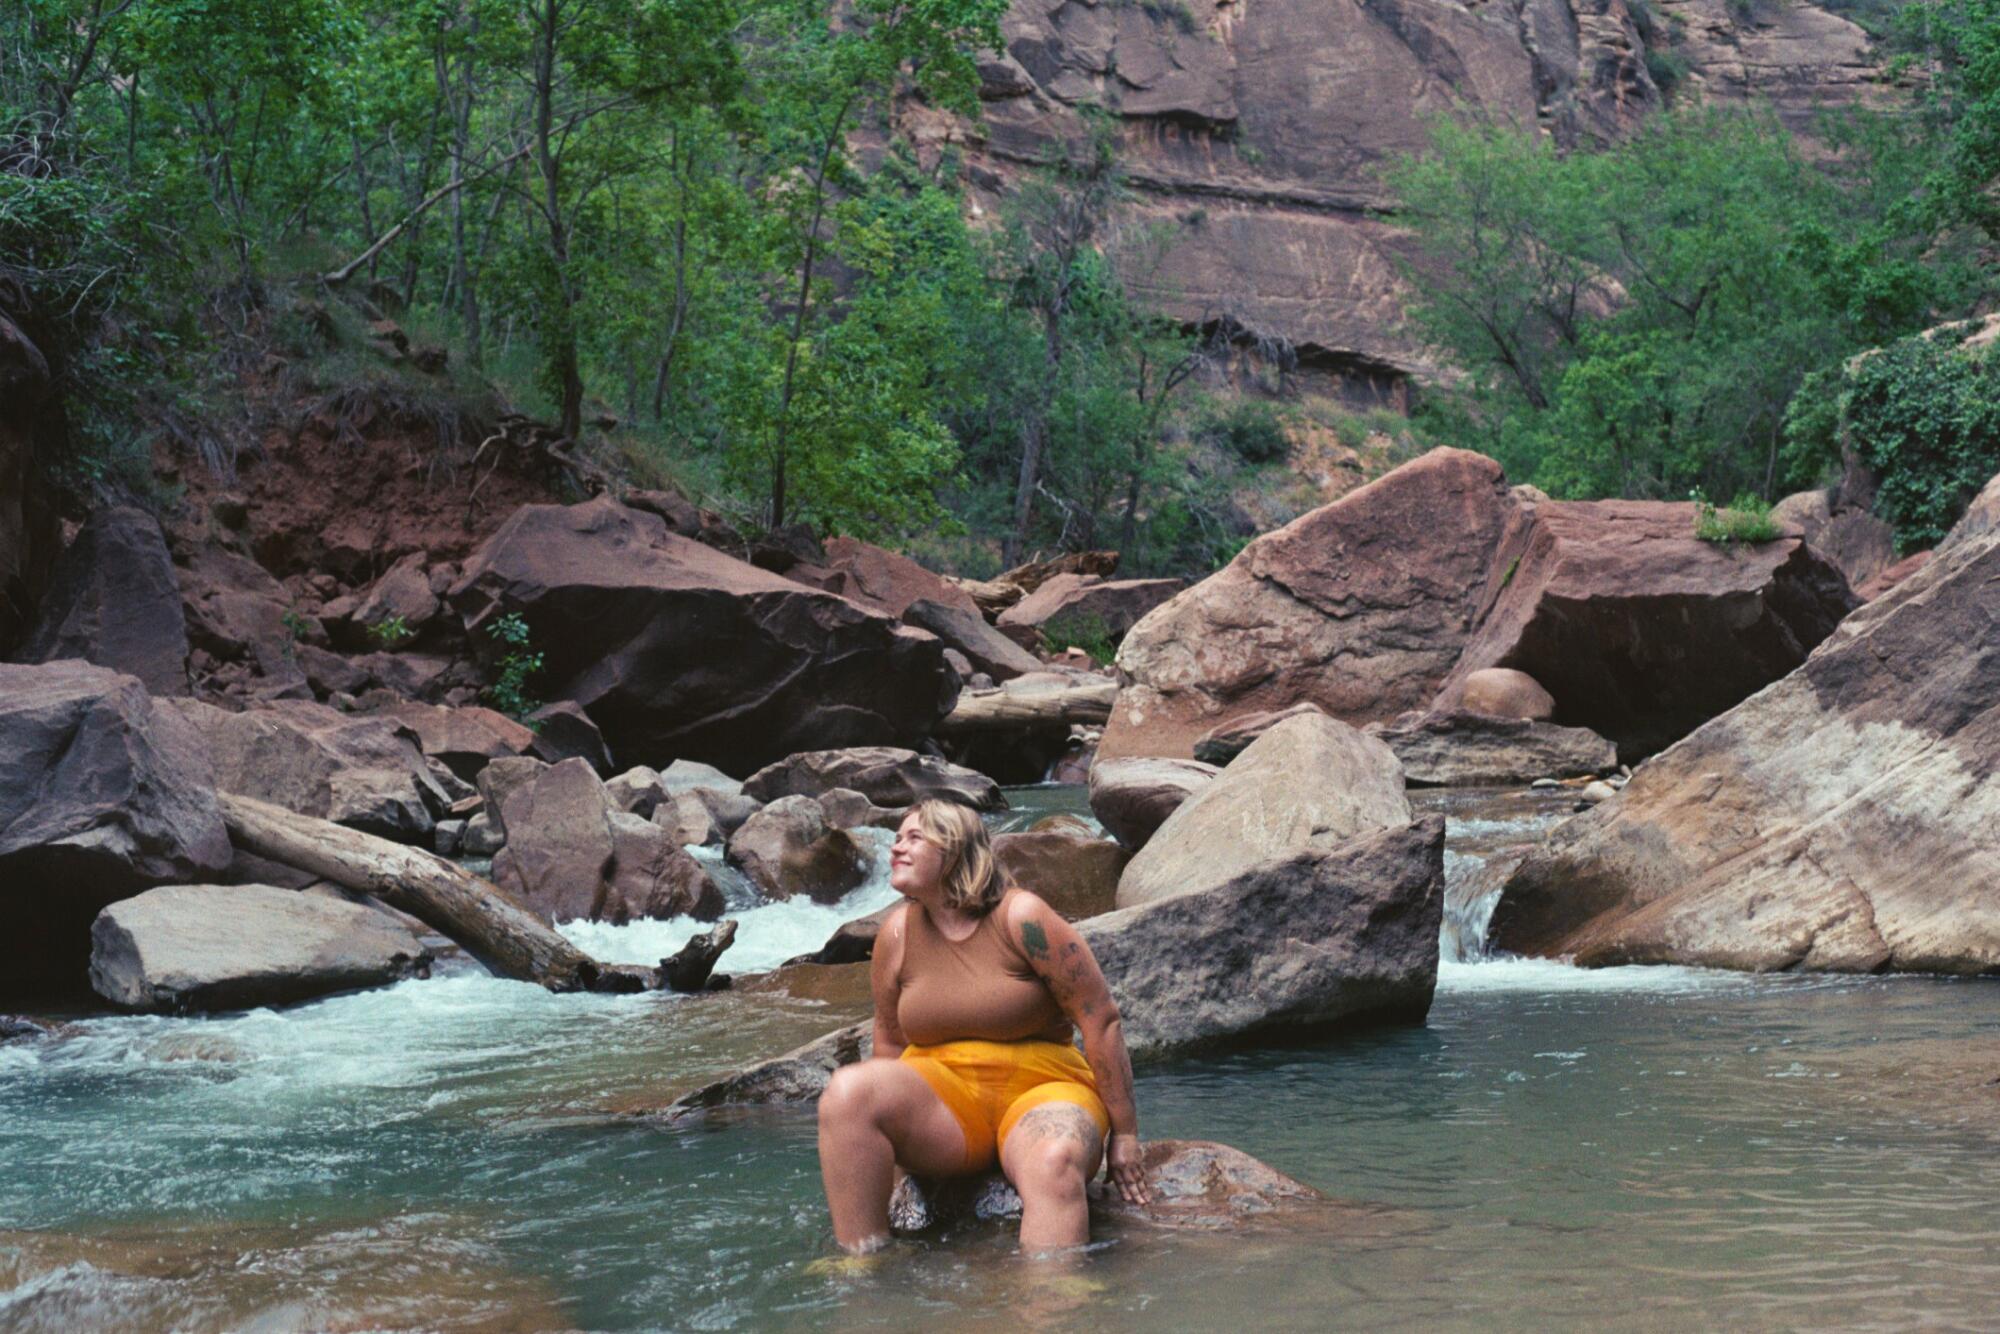 Julia swimming in the Virgin River at Zion National Park.